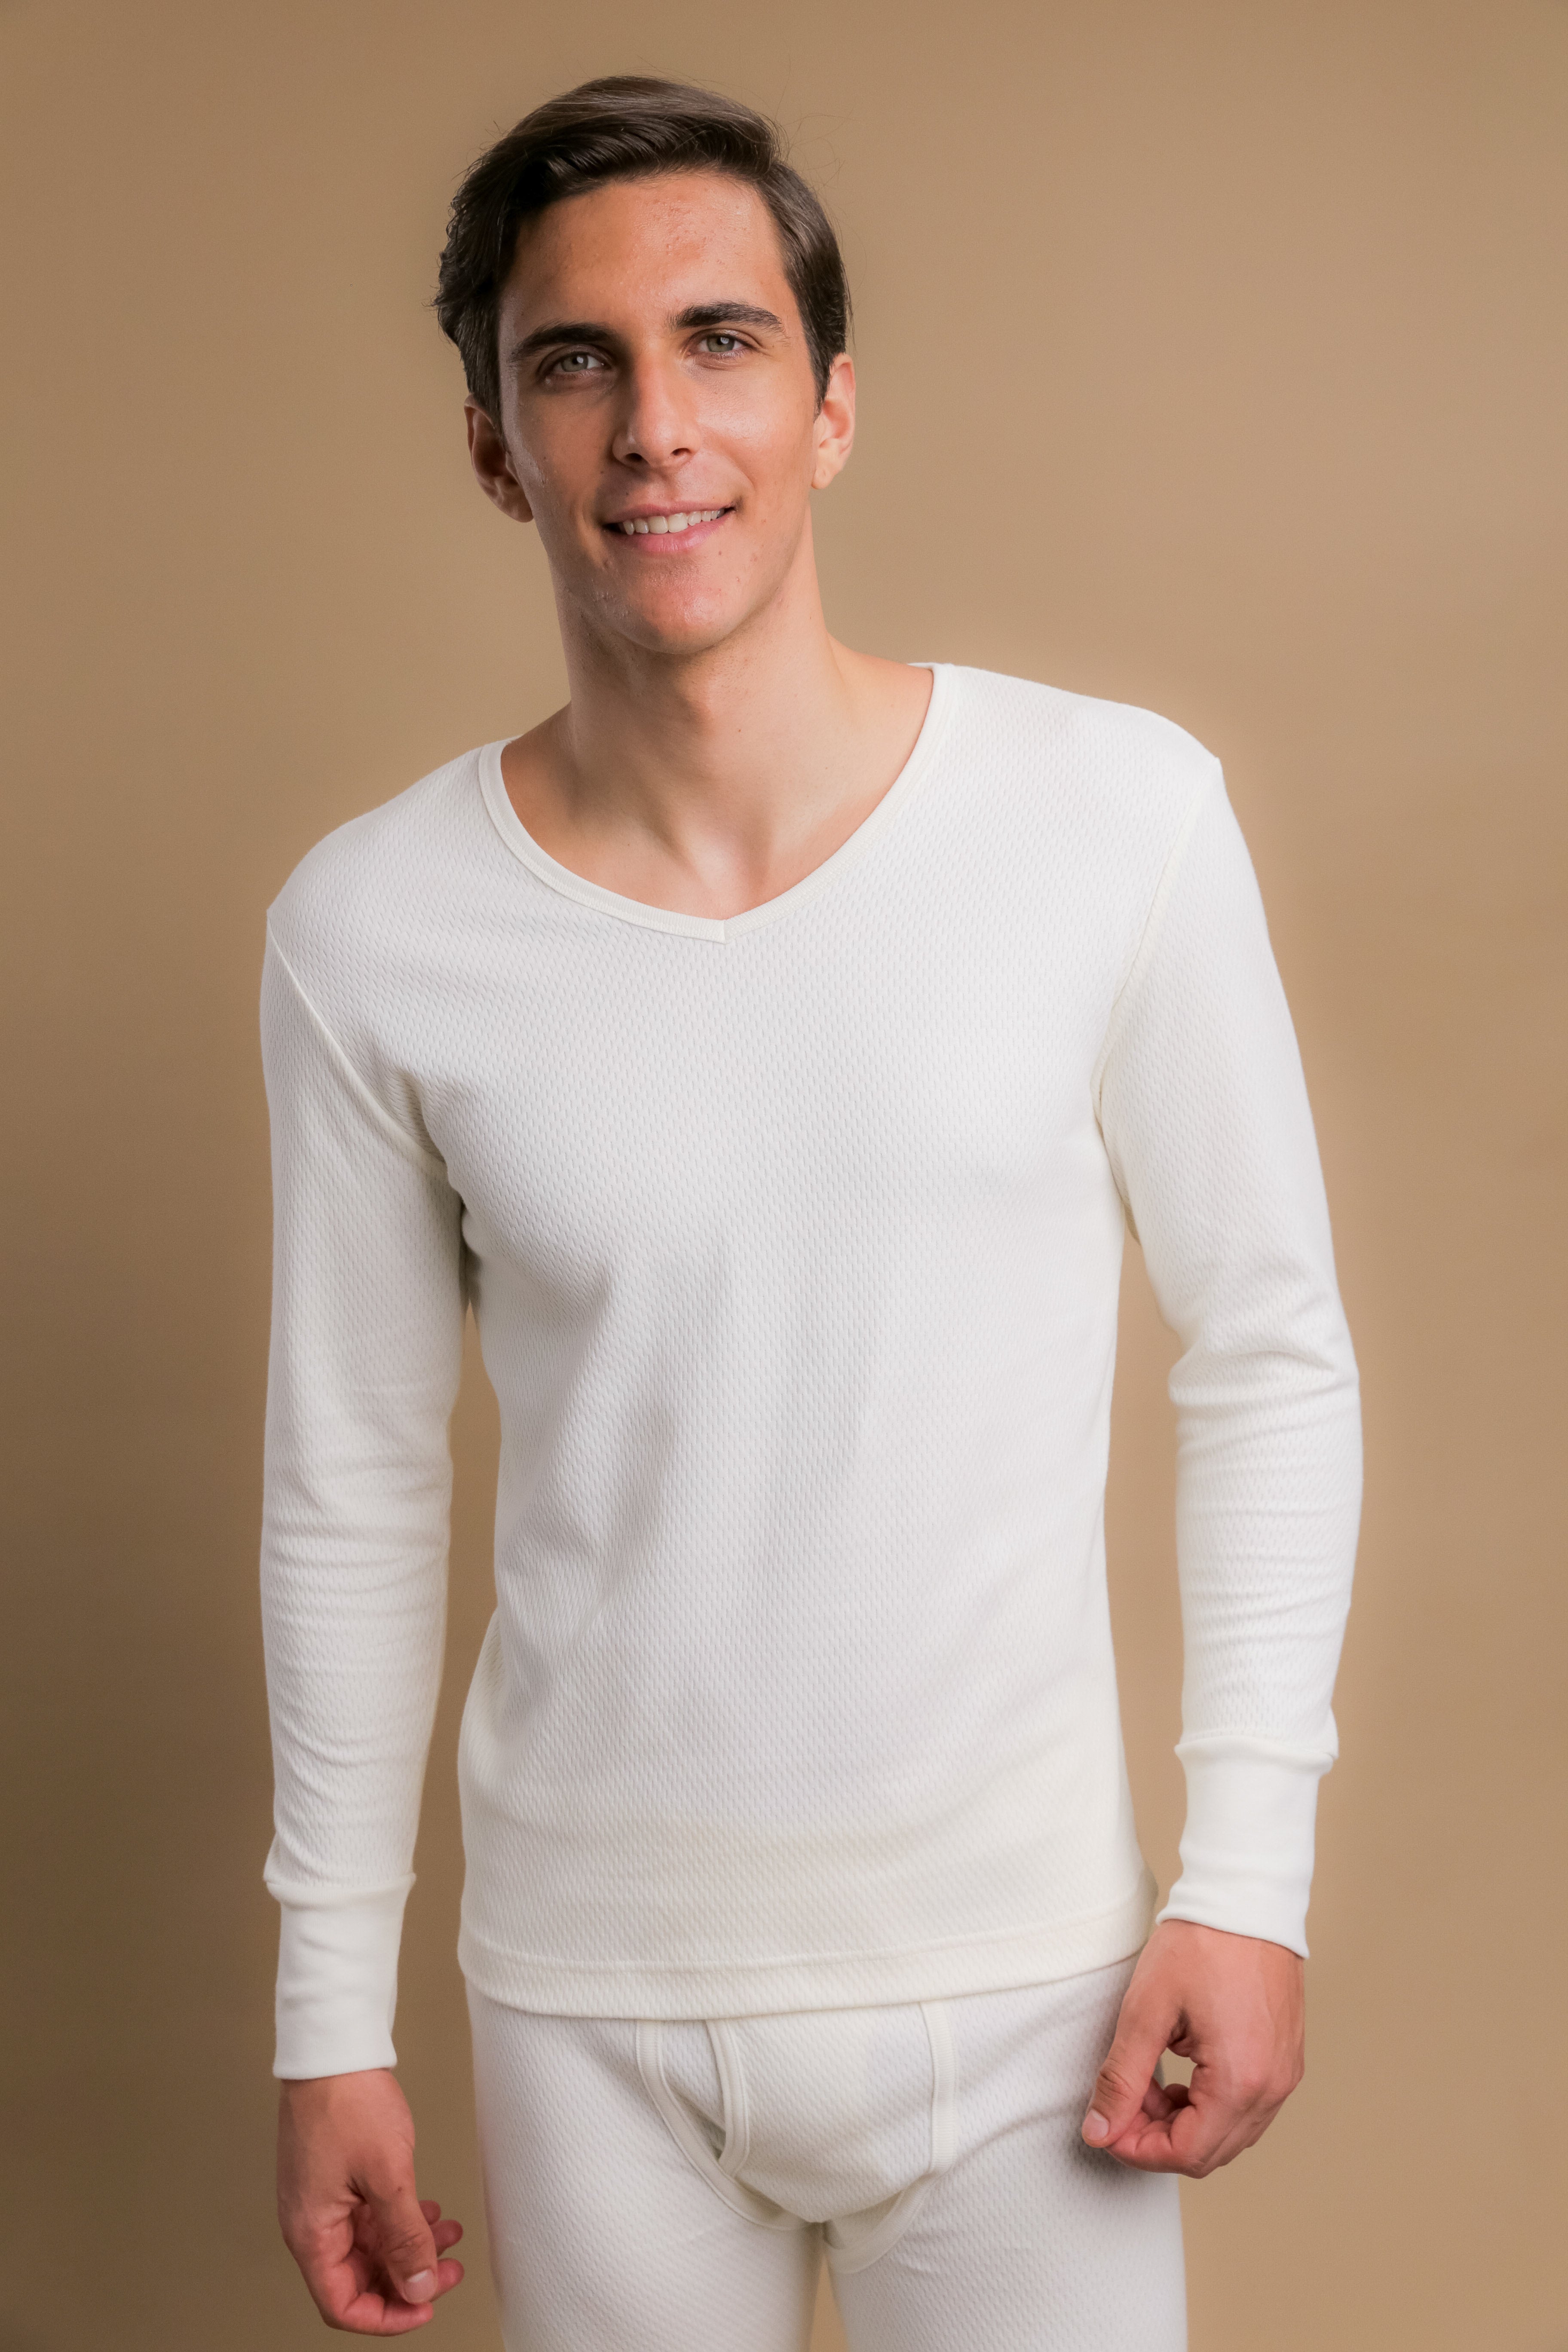 Top Global Thermal Wear Brands — Find Men's Thermals Nearby!, by body care